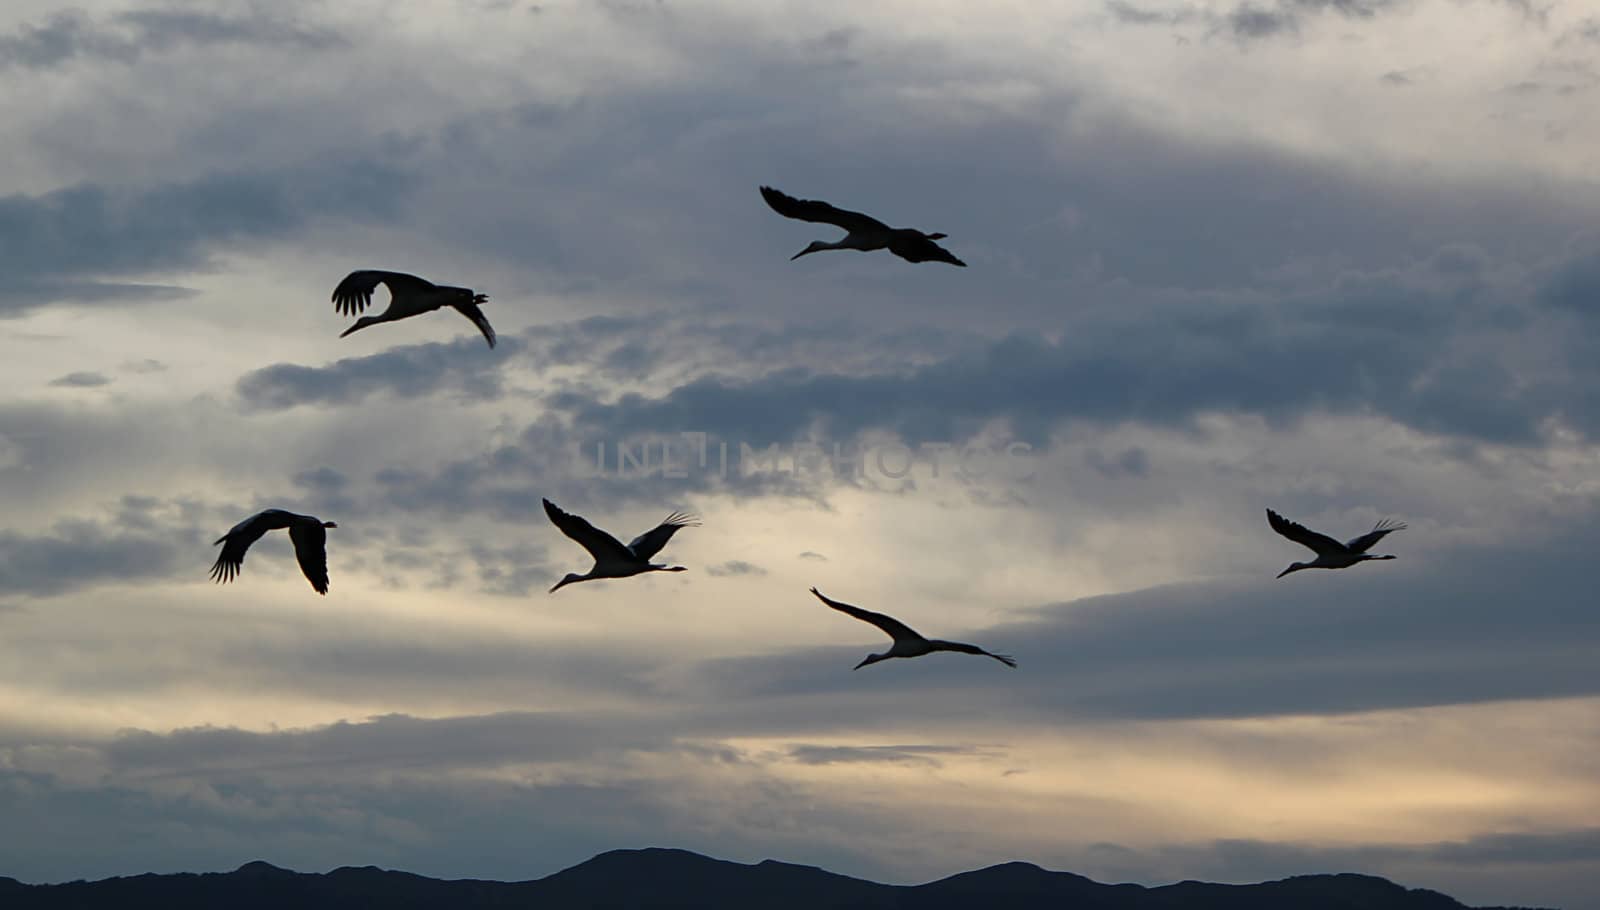 Migrating storks by Elenaphotos21